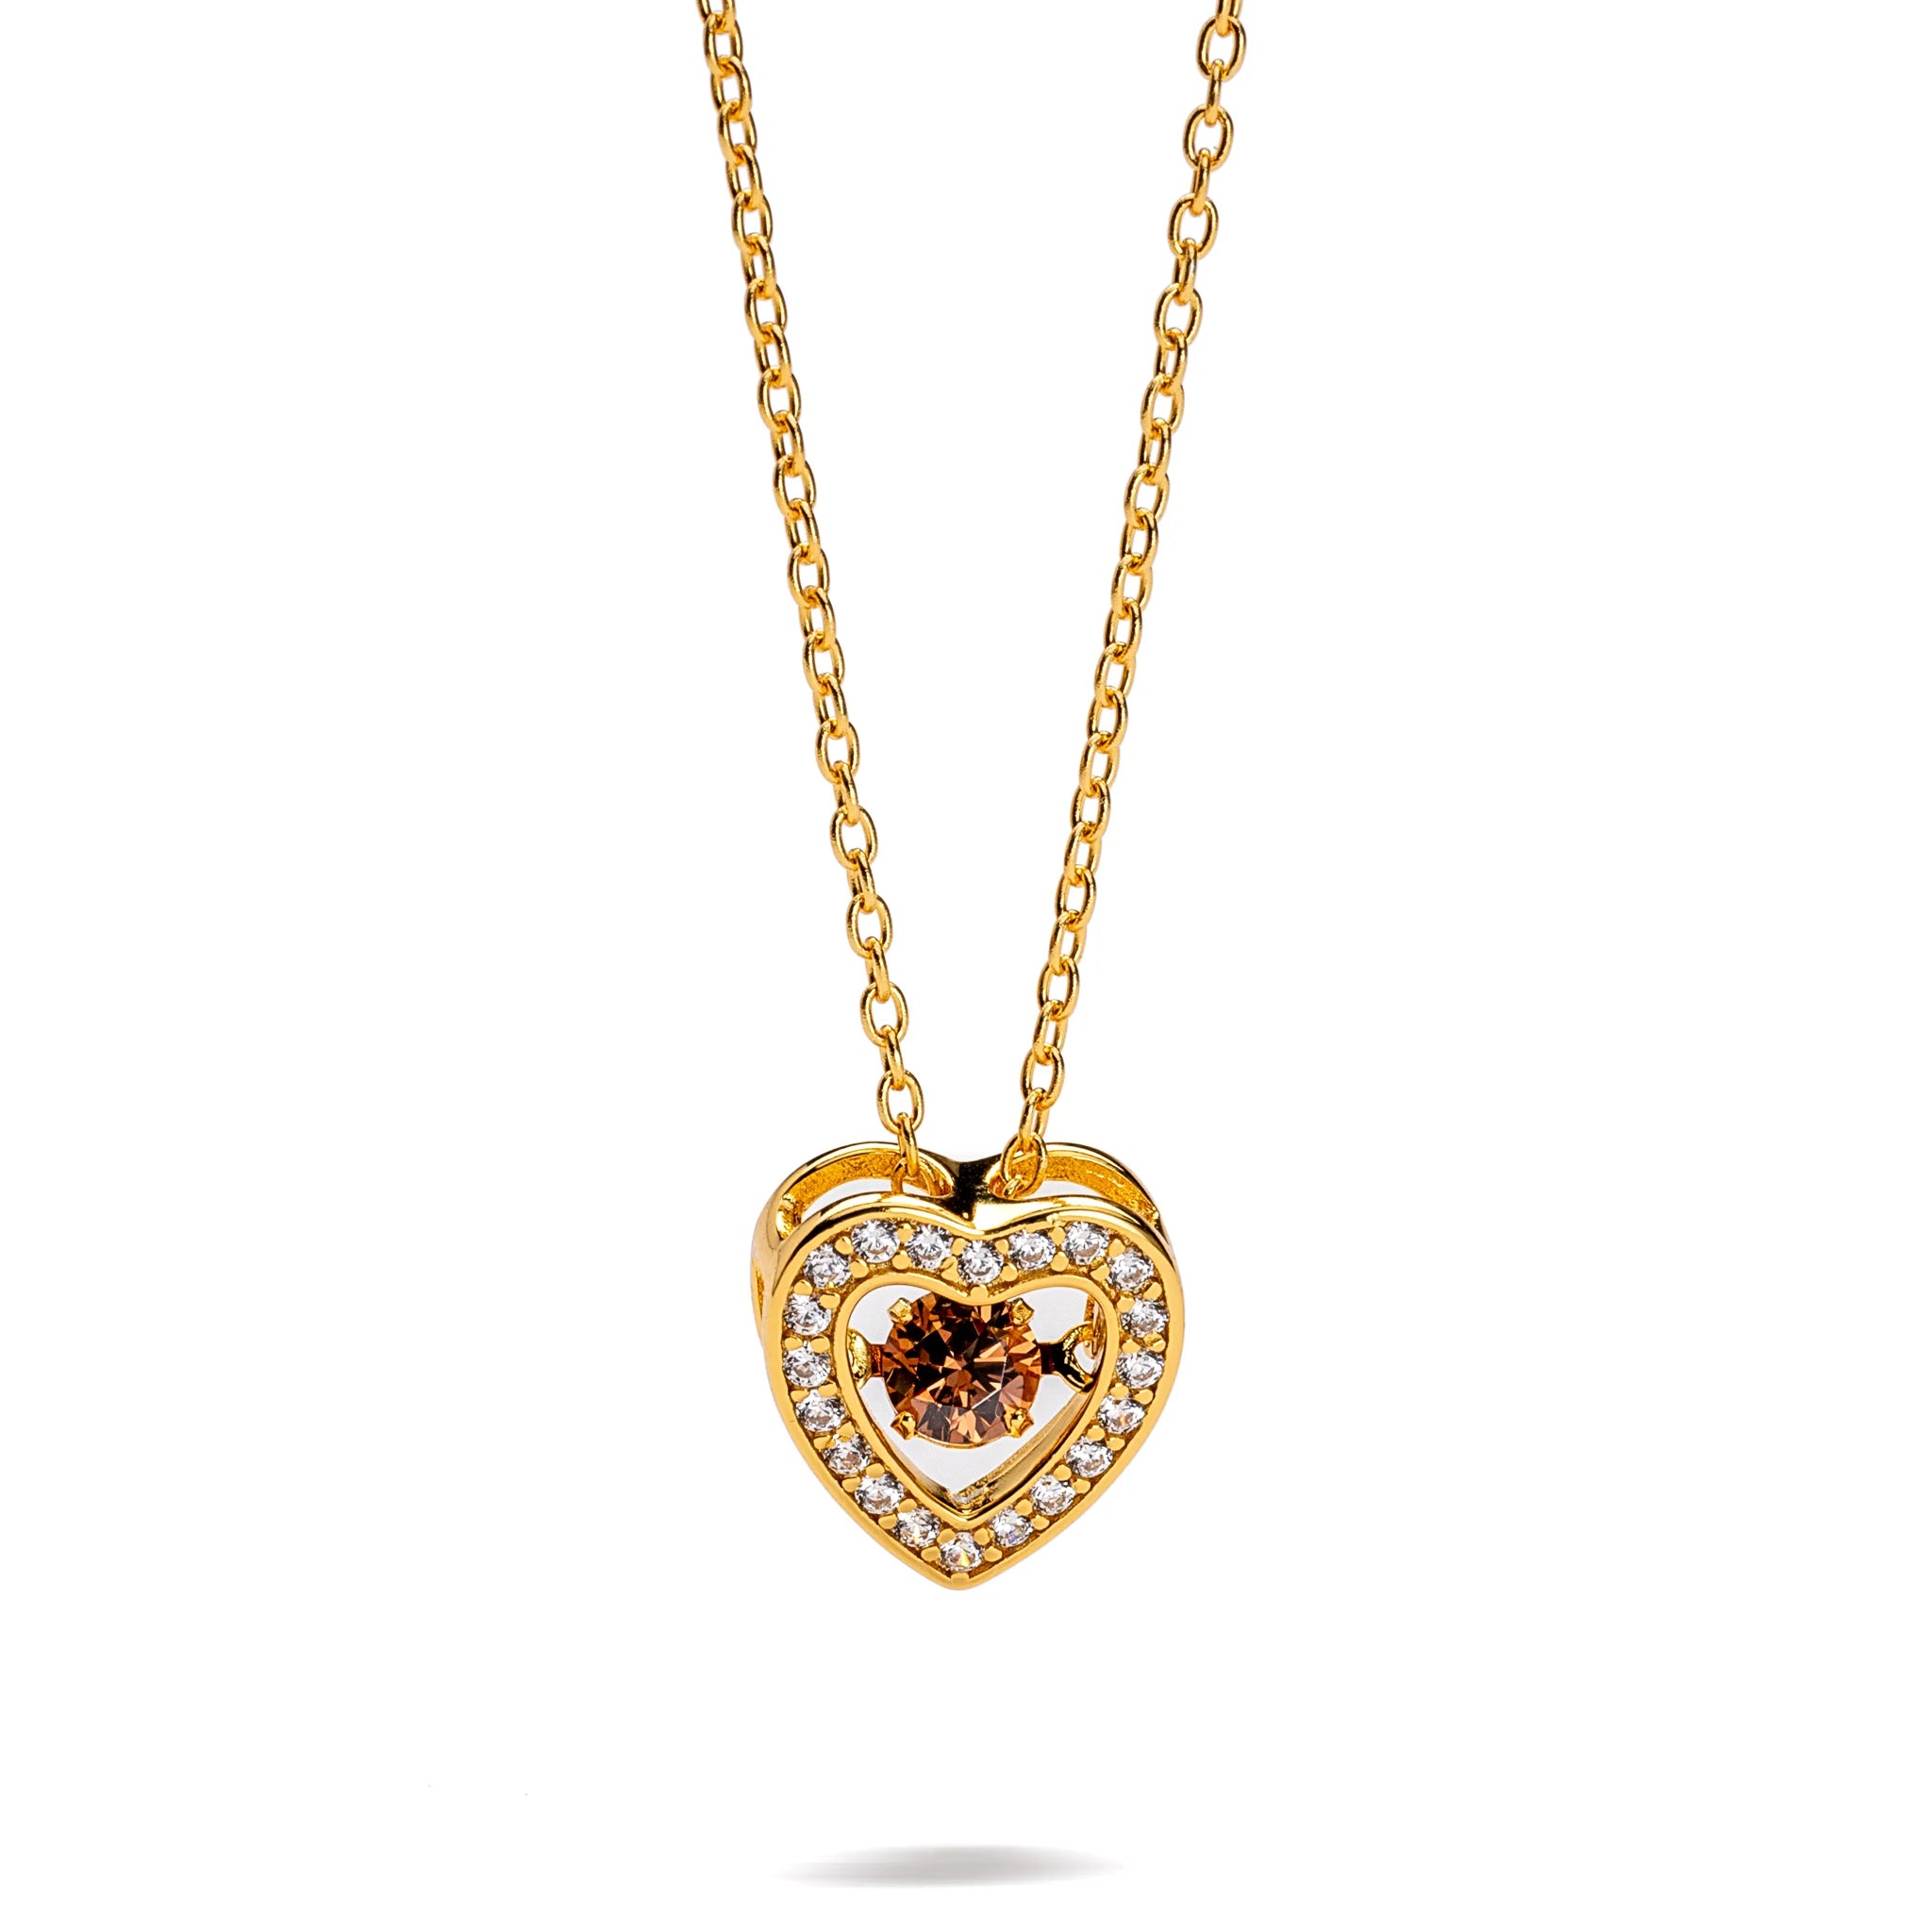 The Lieze Birth Stone Gold Plated Heart Necklace N303